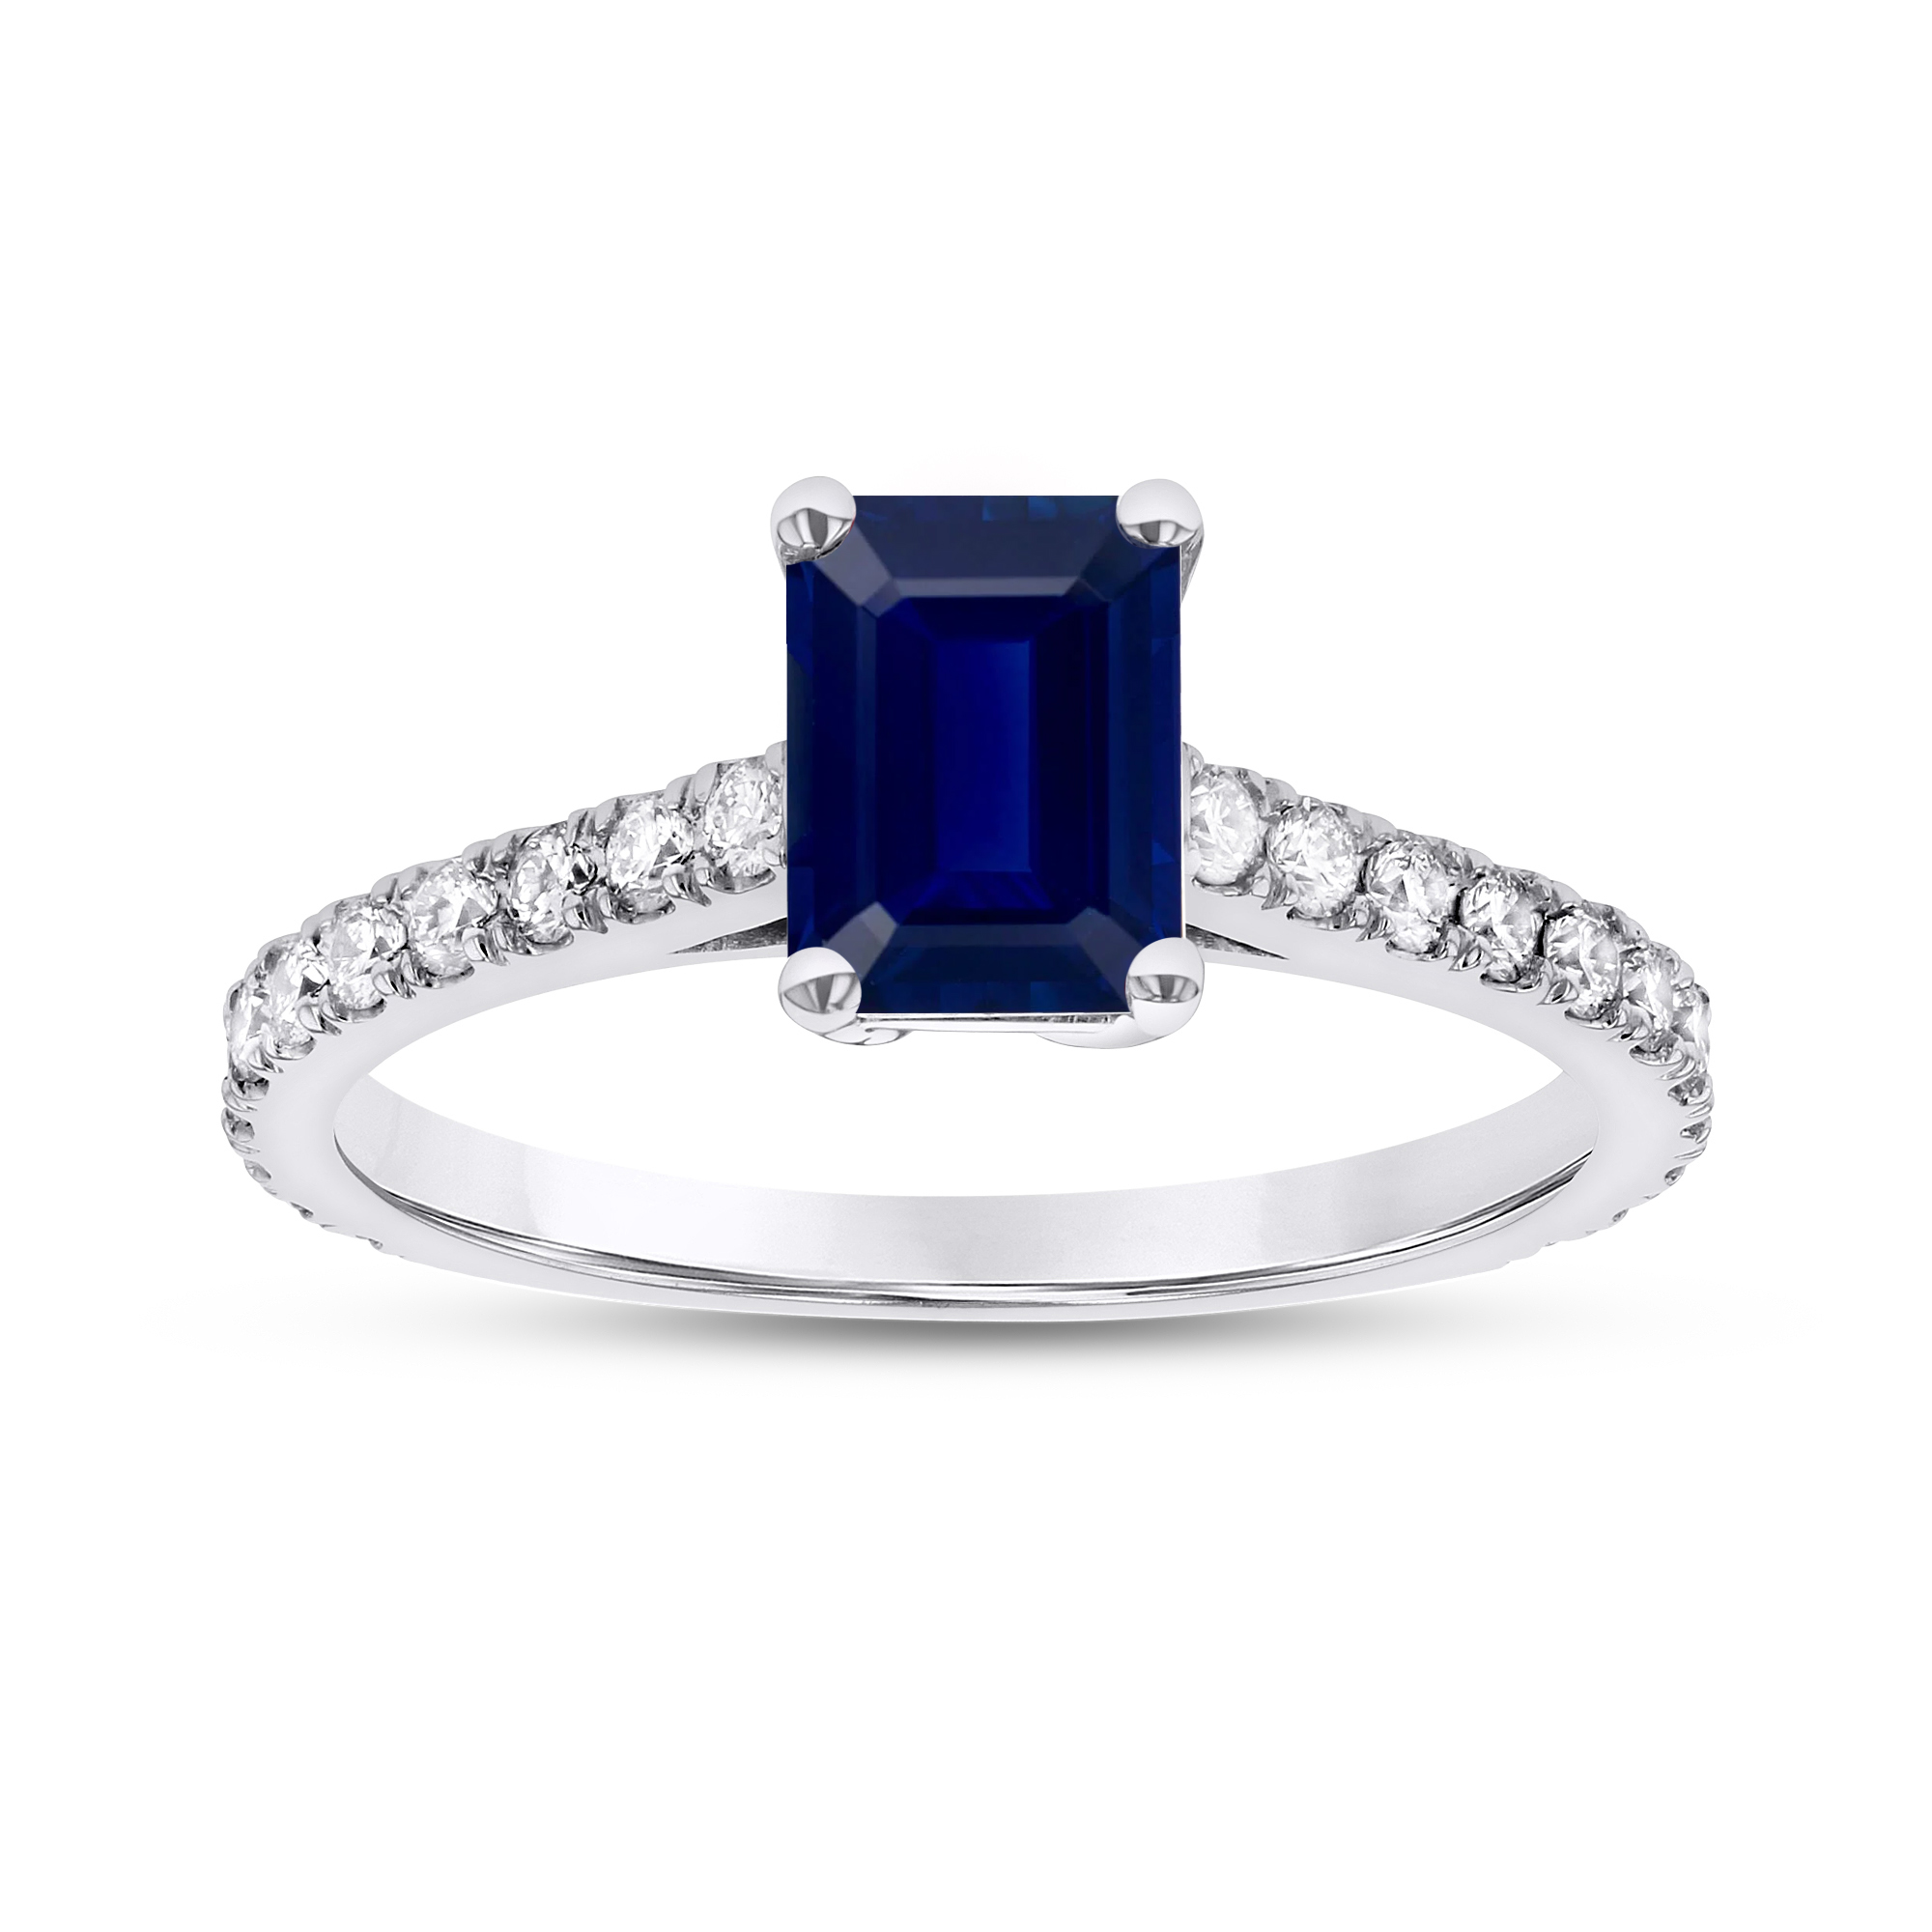 0.36ctw Diamond and Emerald Cut Sapphire Engagement Ring in 14k White Gold